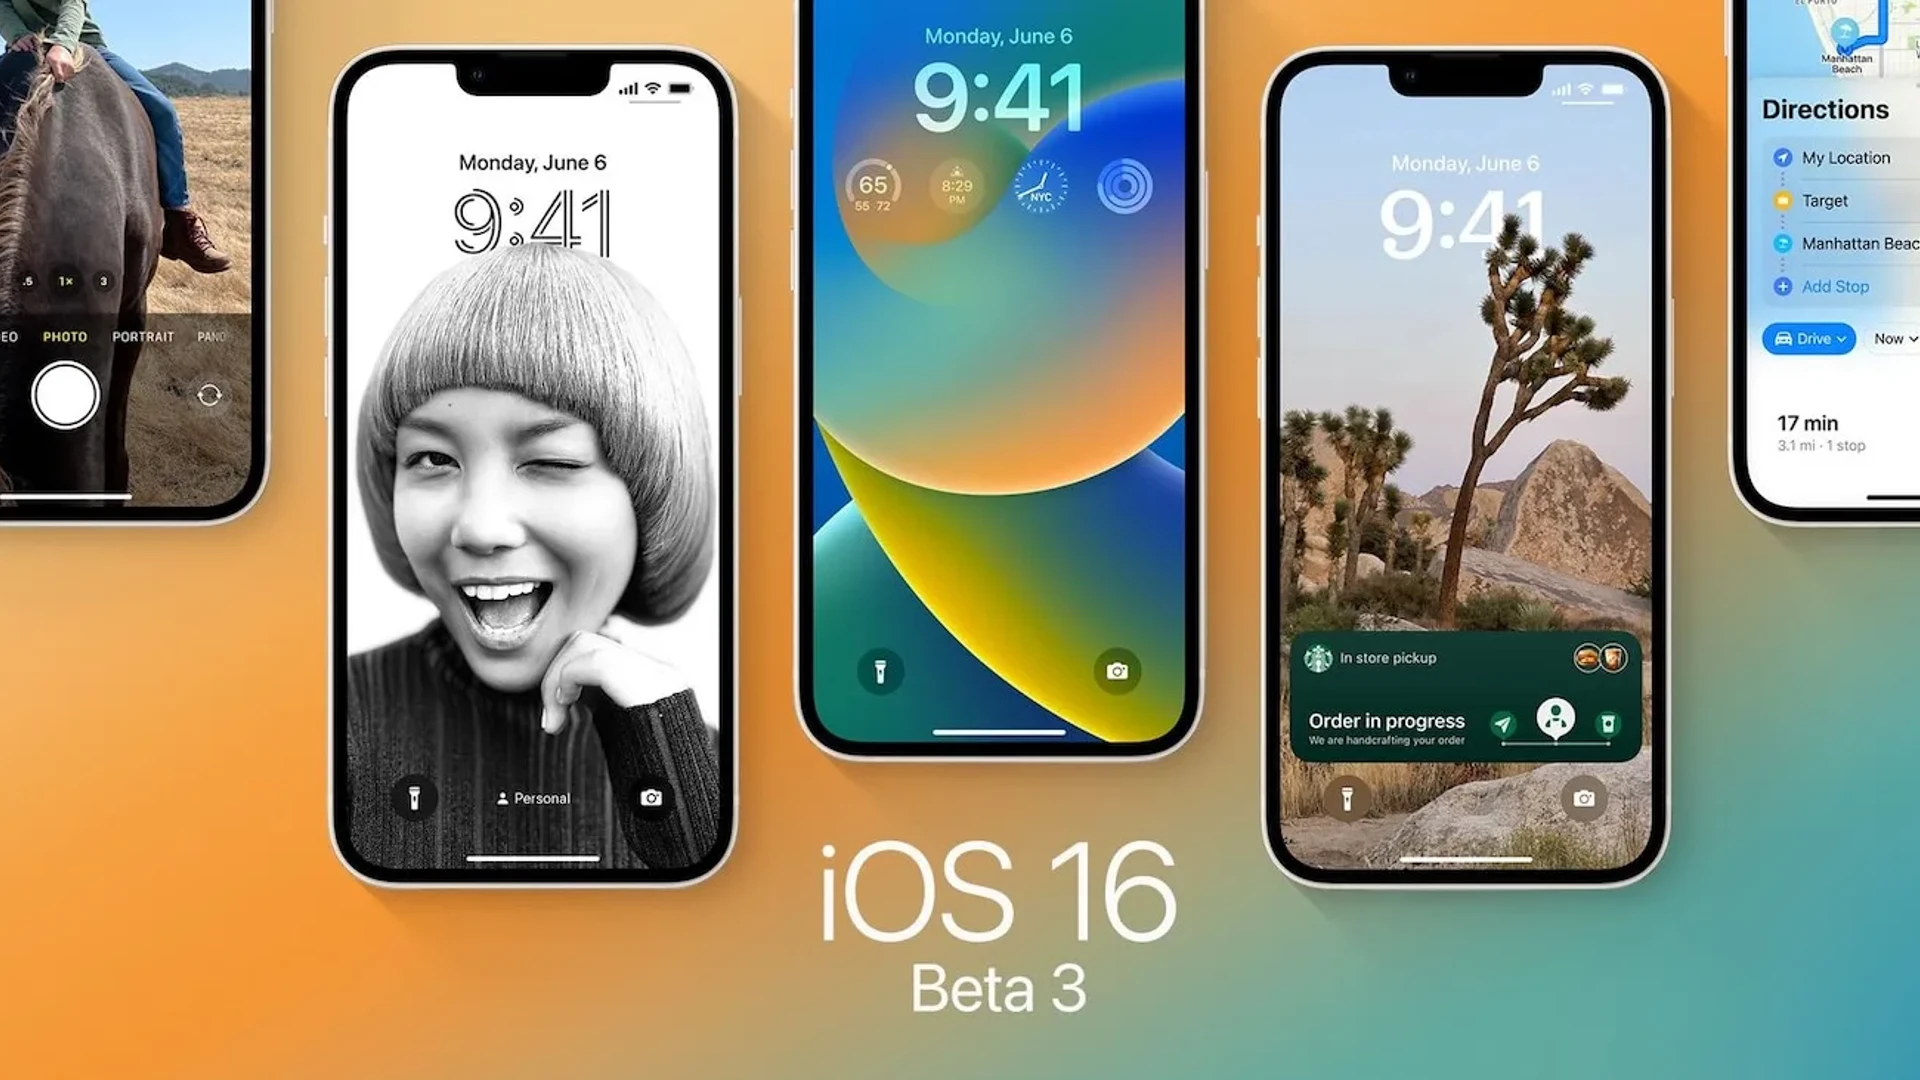 How to download and install iOS 16 Developer Beta 3 on Apple iPhone